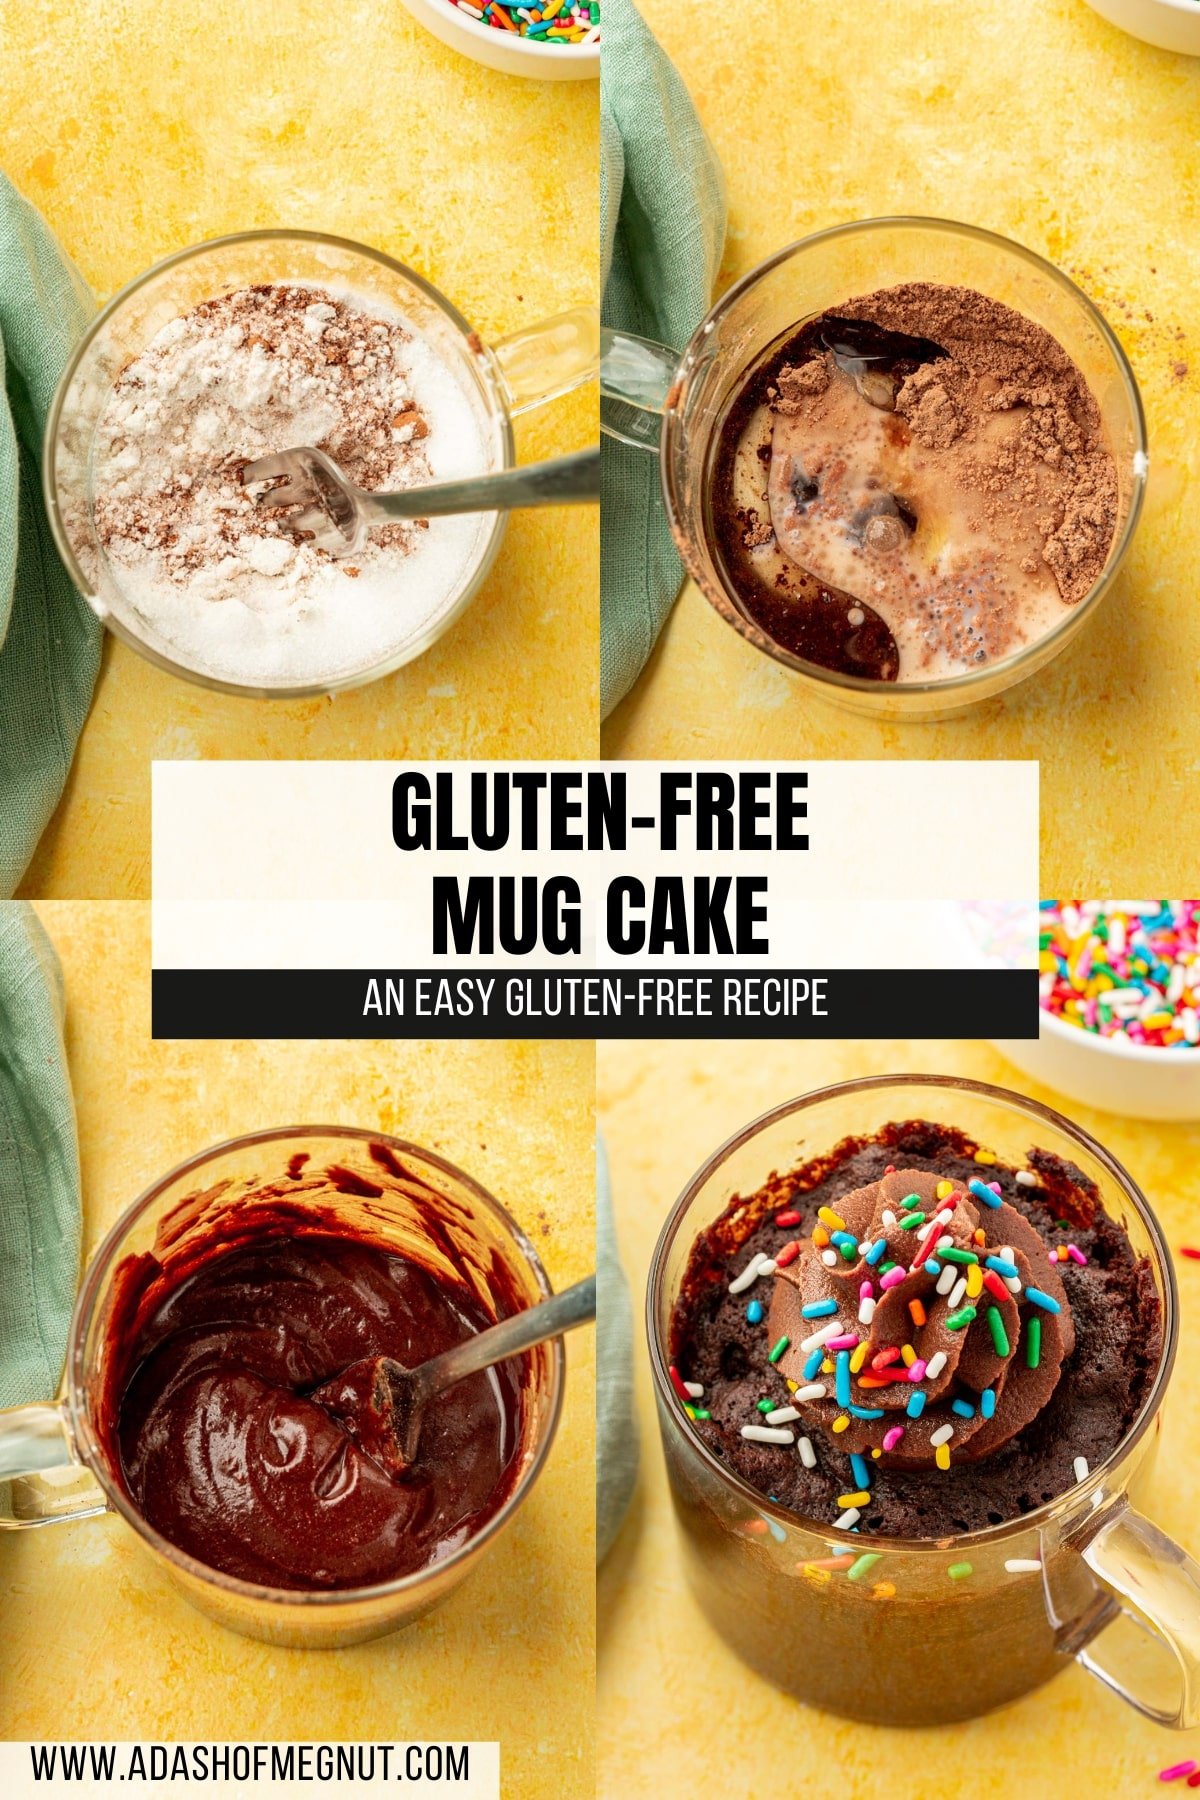 A four photo collage showing the process of making gluten-free mug cake in the microwave. Photo 1: Gluten-free flour, cocoa powder, salt, and granulated sugar being mixed together by a fork in a glass mug. Photo 2: Cocoa powder, almond milk, oil, and vanilla in a glass mug before mixing together to make a gluten-free mug cake. Photo 3: Gluten-free chocolate cake batter in a glass mug being mixed with a fork. Photo 4: A closeup of a gluten-free mug cake in a glass mug topped with a swirl of chocolate buttercream and colorful sprinkles.